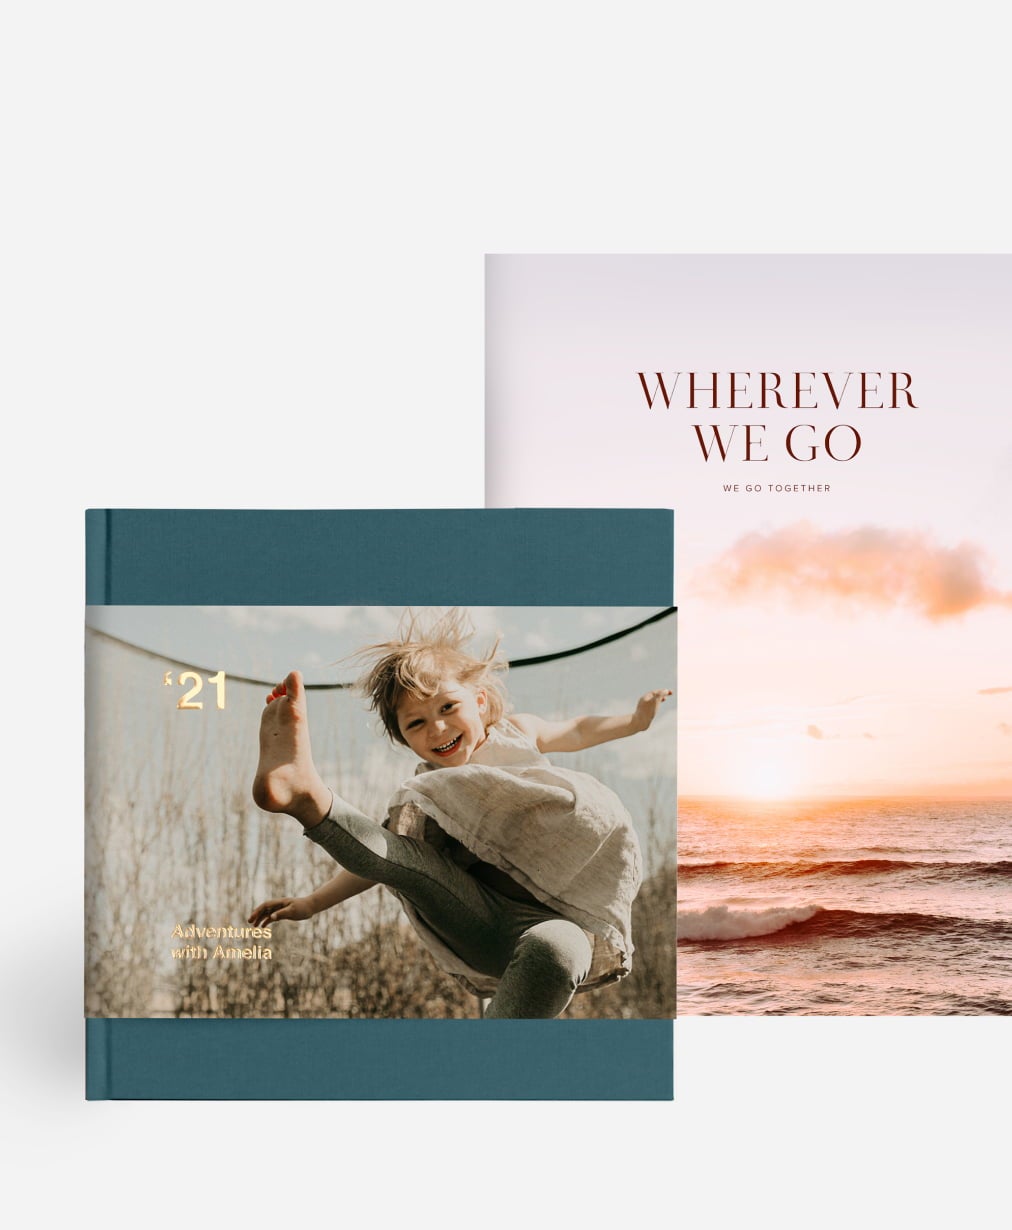 Two hardcover photo books, one kid’s photo book and one travel photo book